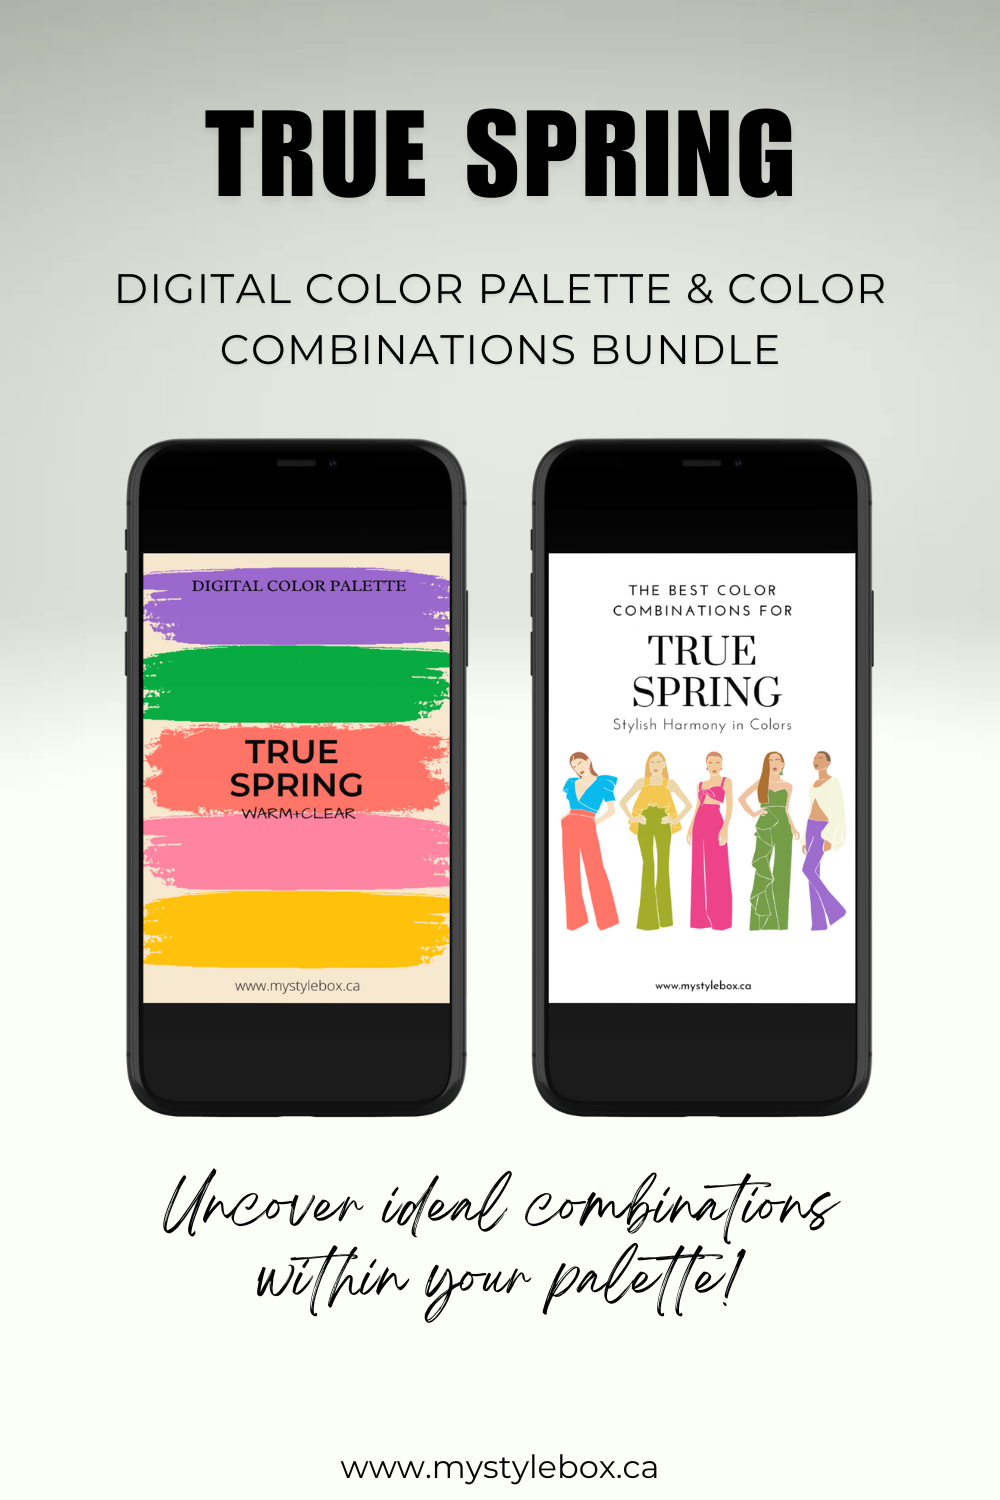 True (Warm) Spring Digital Color Palette and Color Combinations